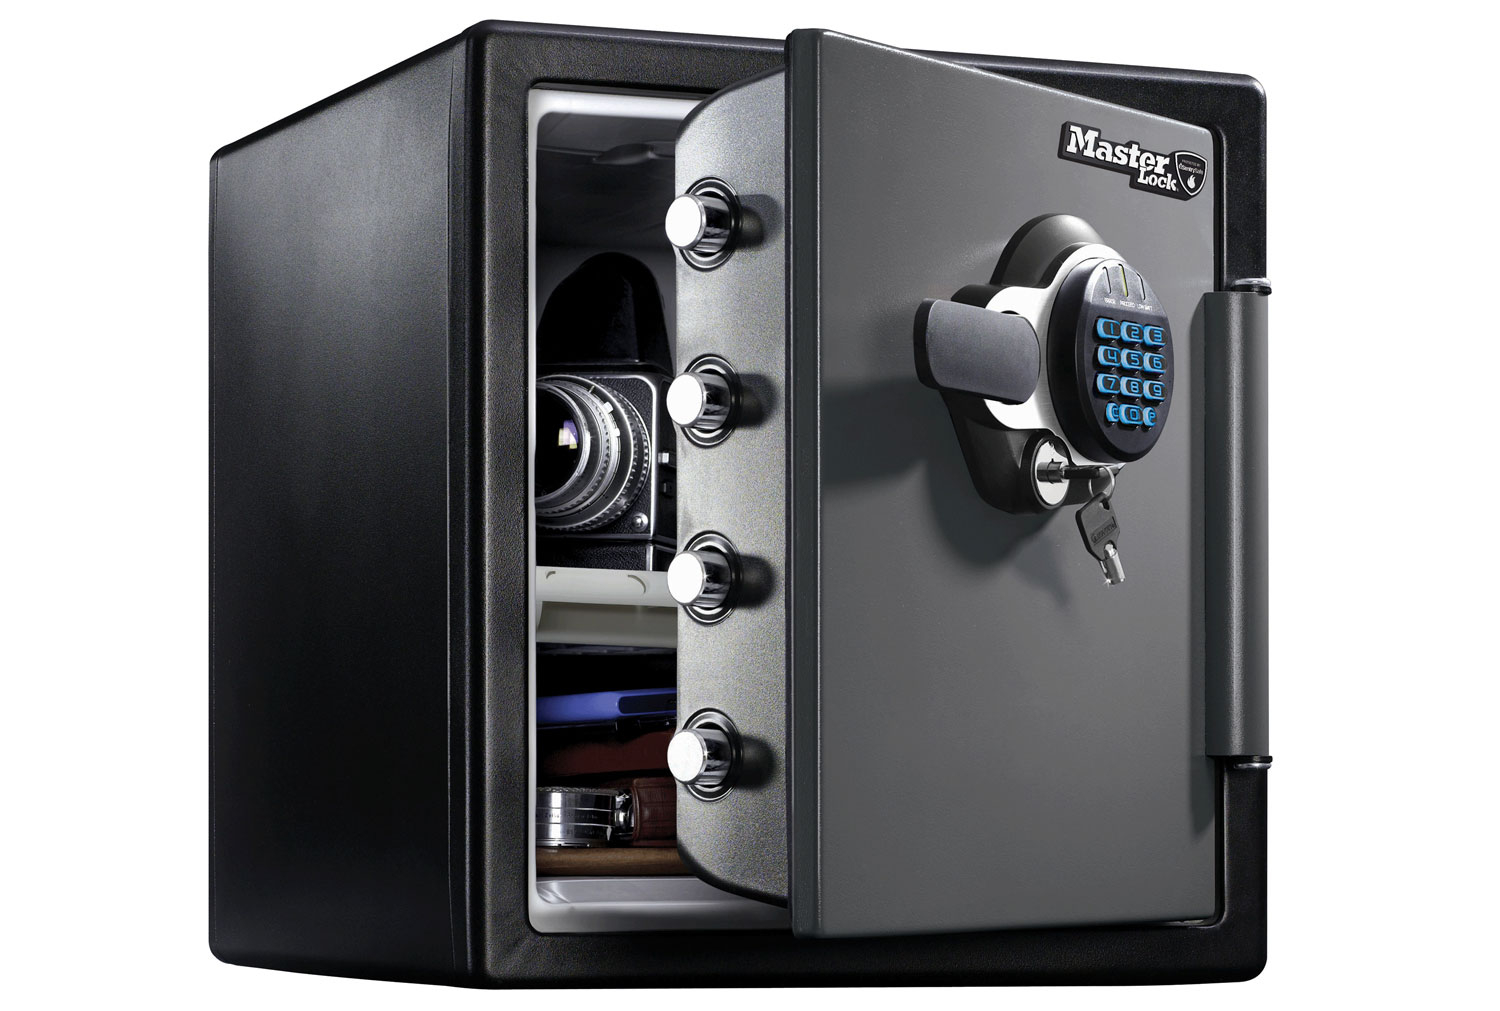 Master Lock LTW123GTC X Large 2 Hour Fire Safe With Electronic Lock (34ltrs)